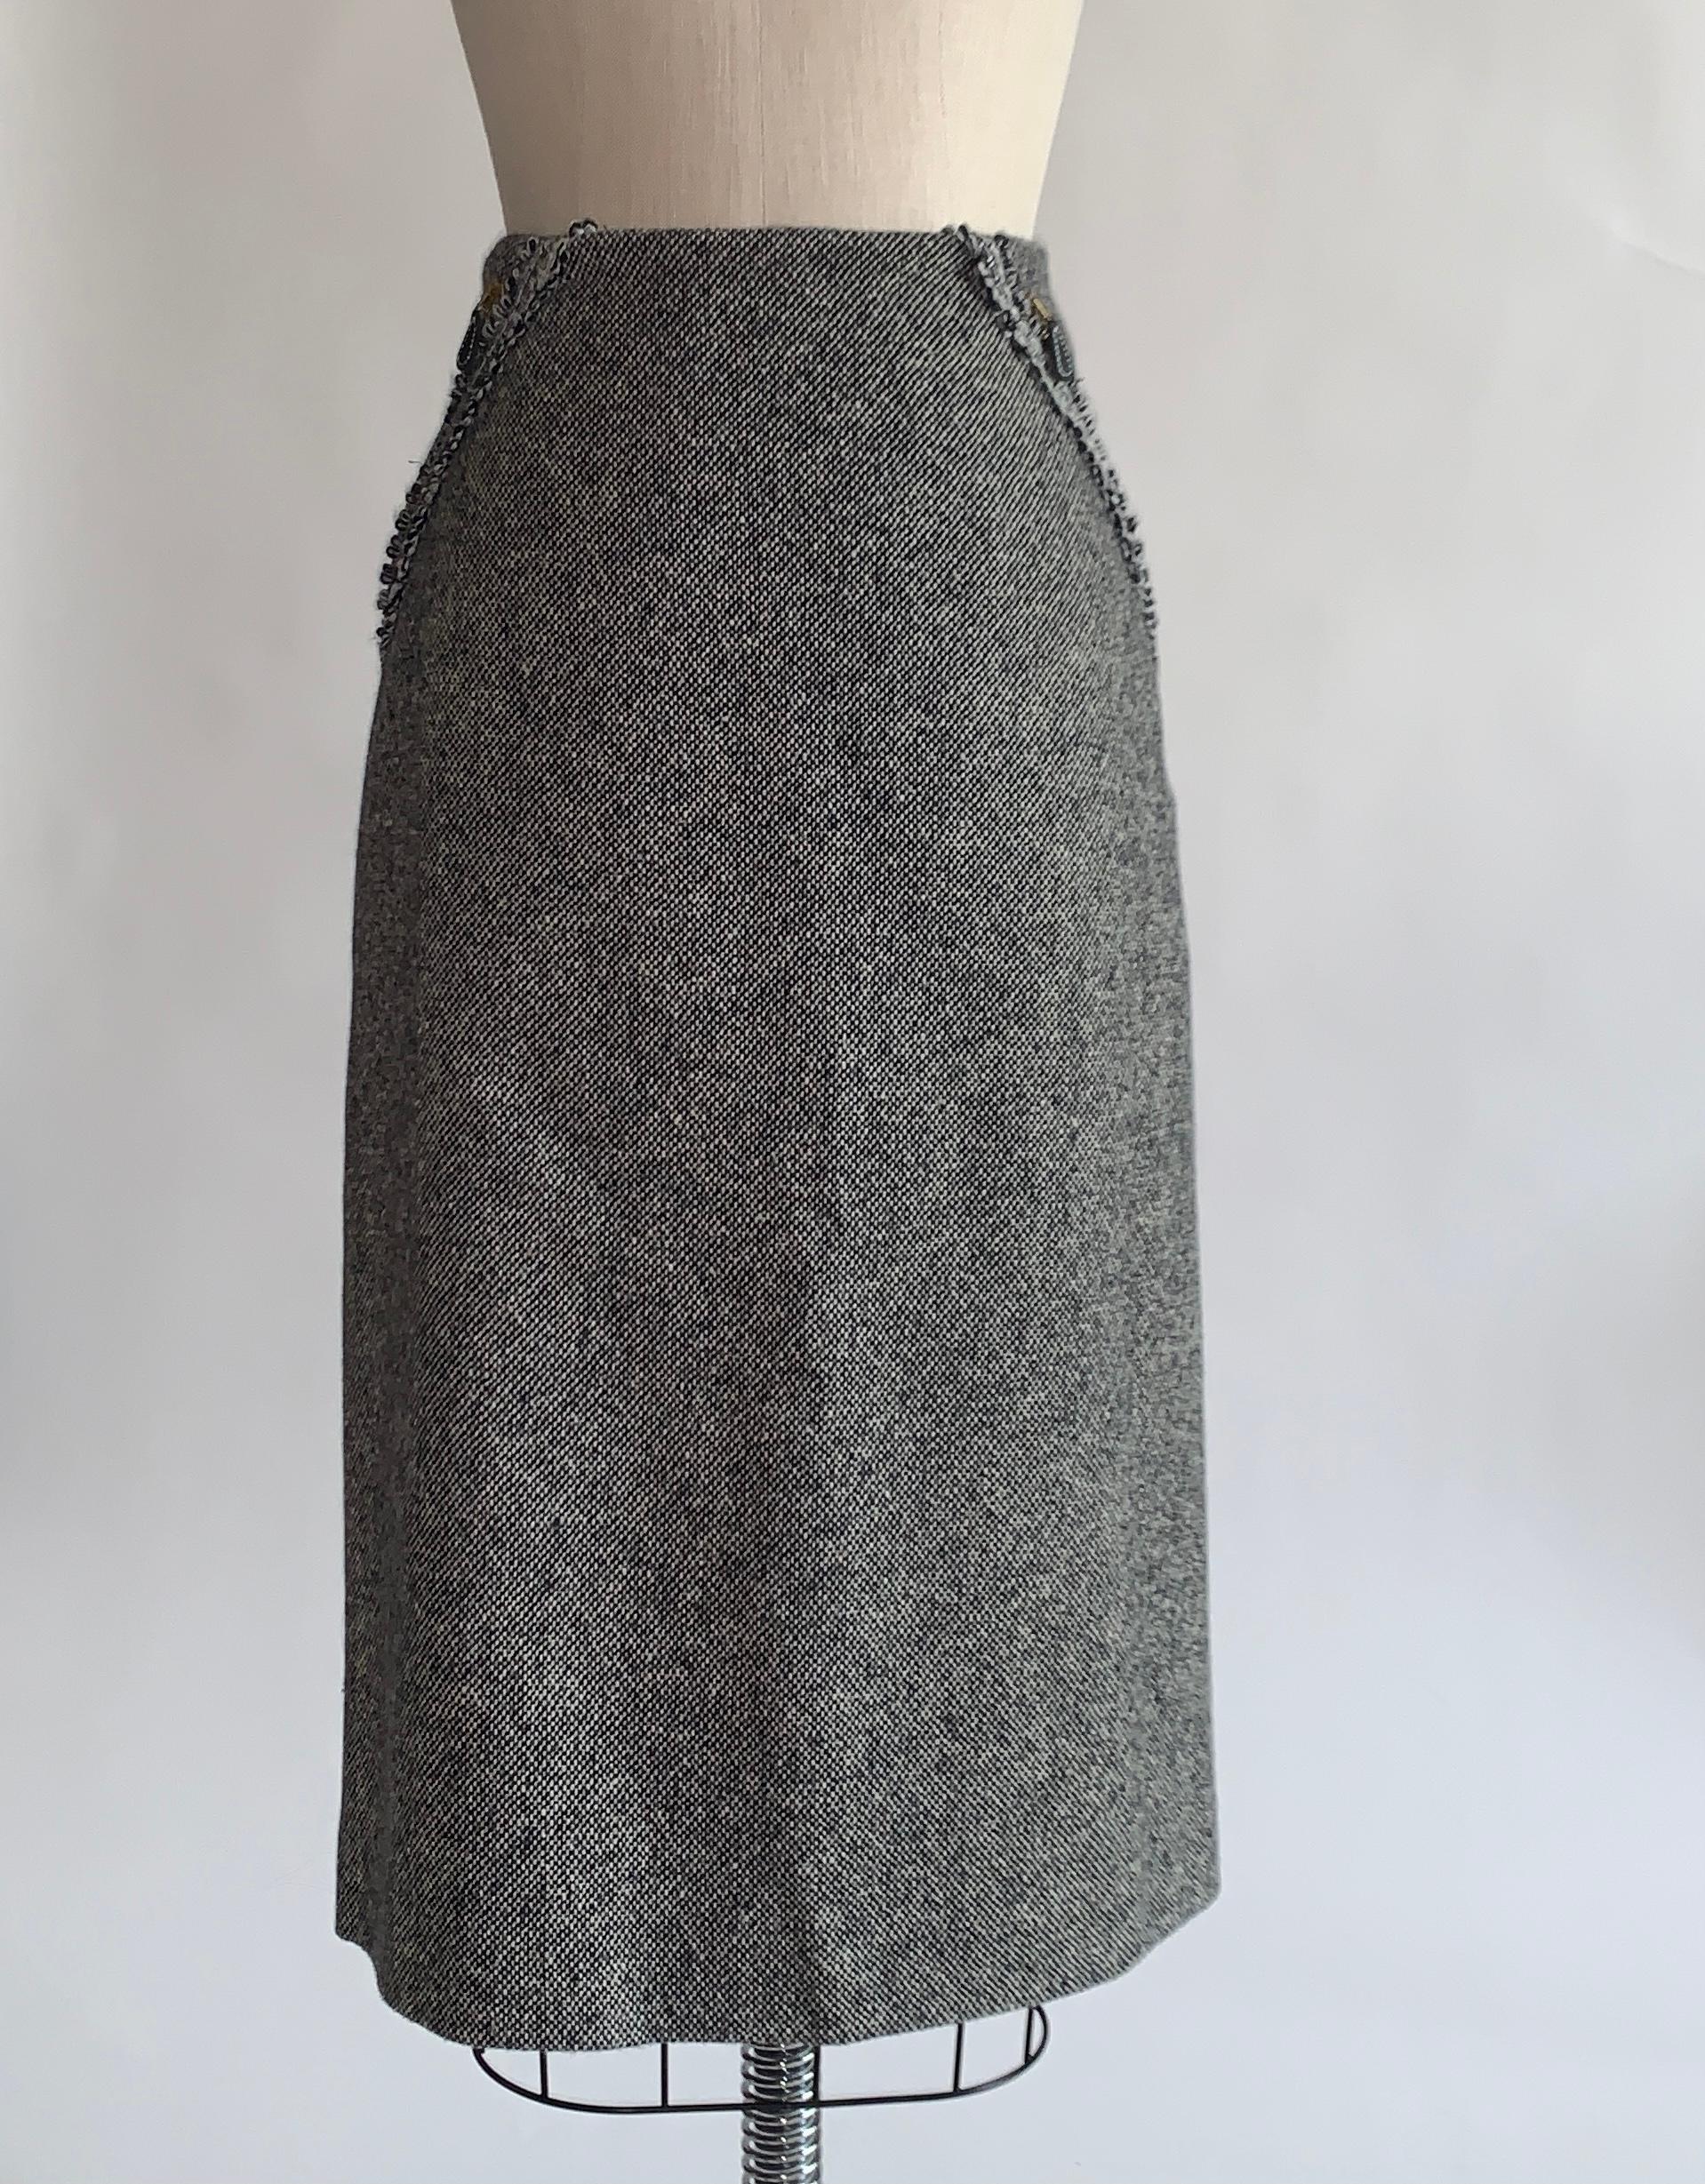 Alexander McQueen 2003 skirt in black and white tweed (reads a little grey to the eye.) . Back zip and hook and eye. Gold tone zips with leather tabs run alongside black and white trim from front waist to back hem. Zippers can unzip at bottom to